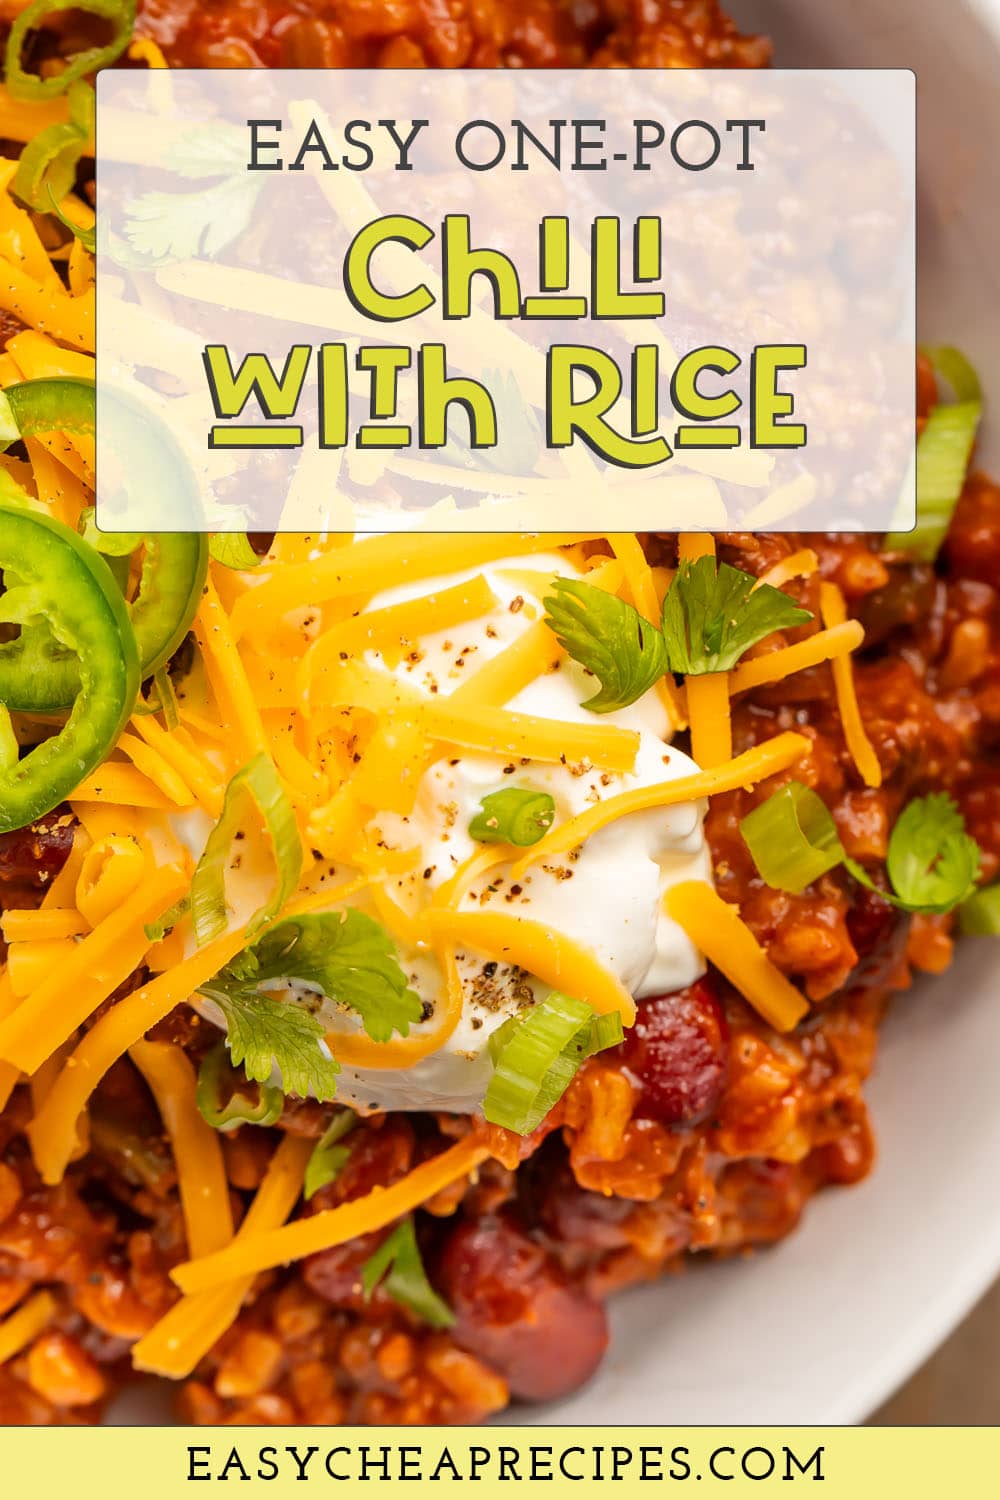 Pin graphic for chili with rice.